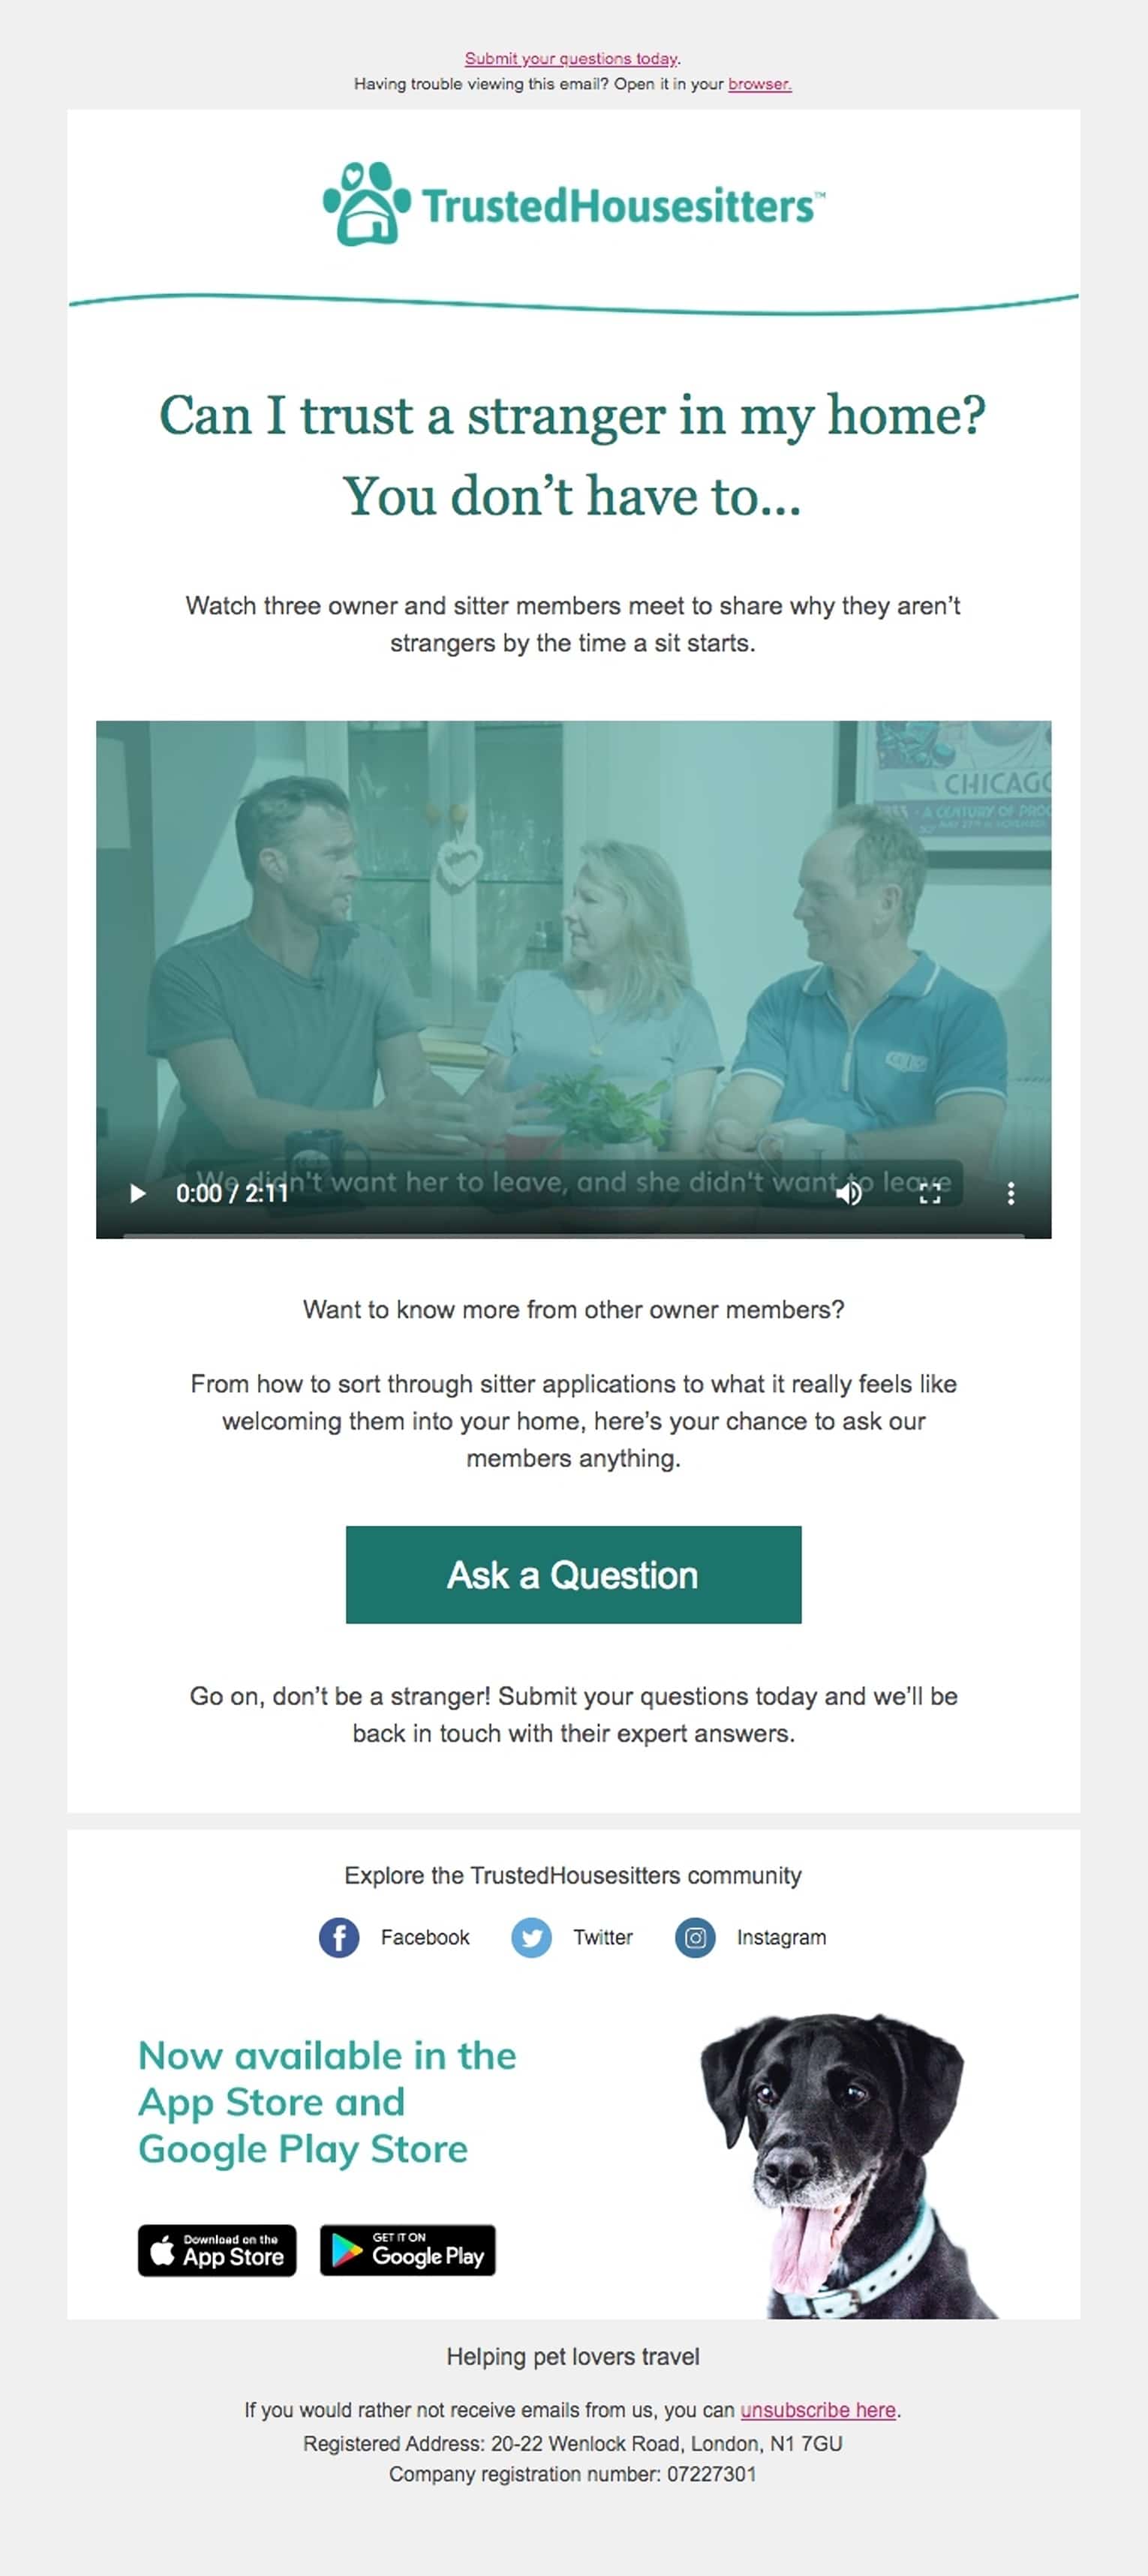 TrustedHousesitters email using curiosity as an emotional trigger by asking a thought-provoking question